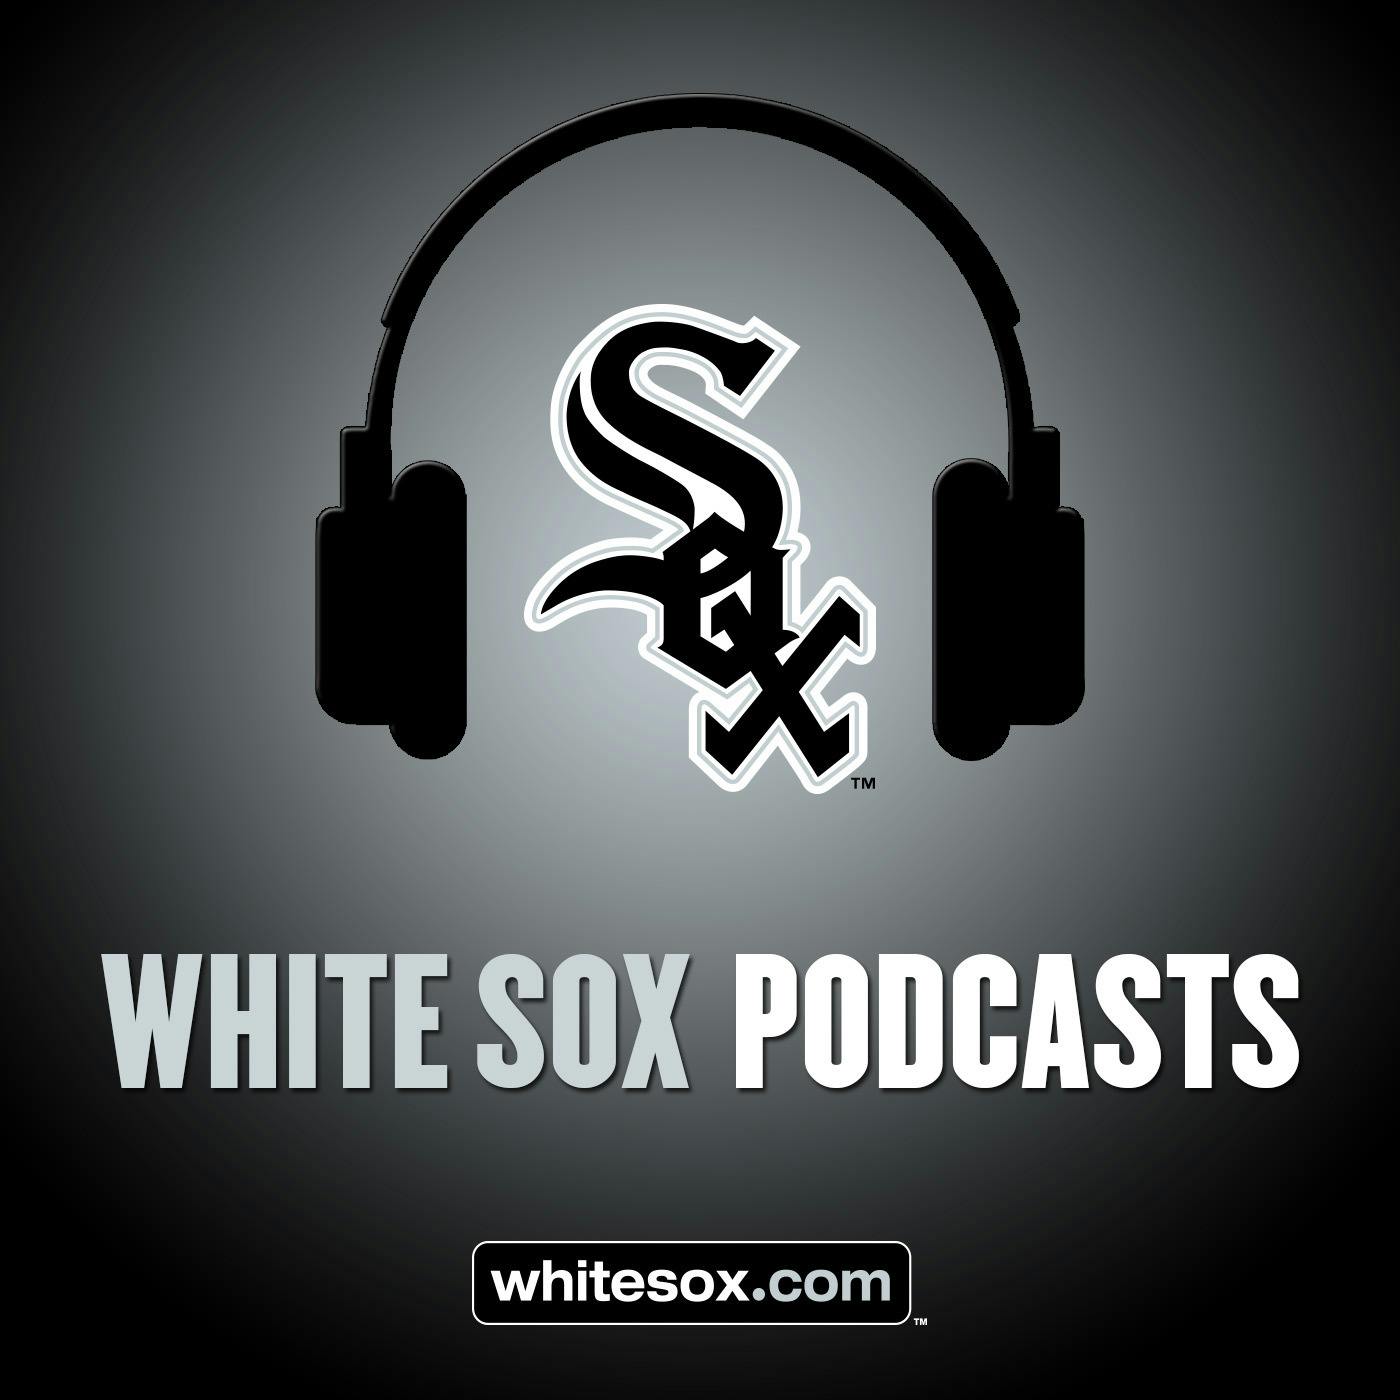 12/17/17: White Sox Weekly